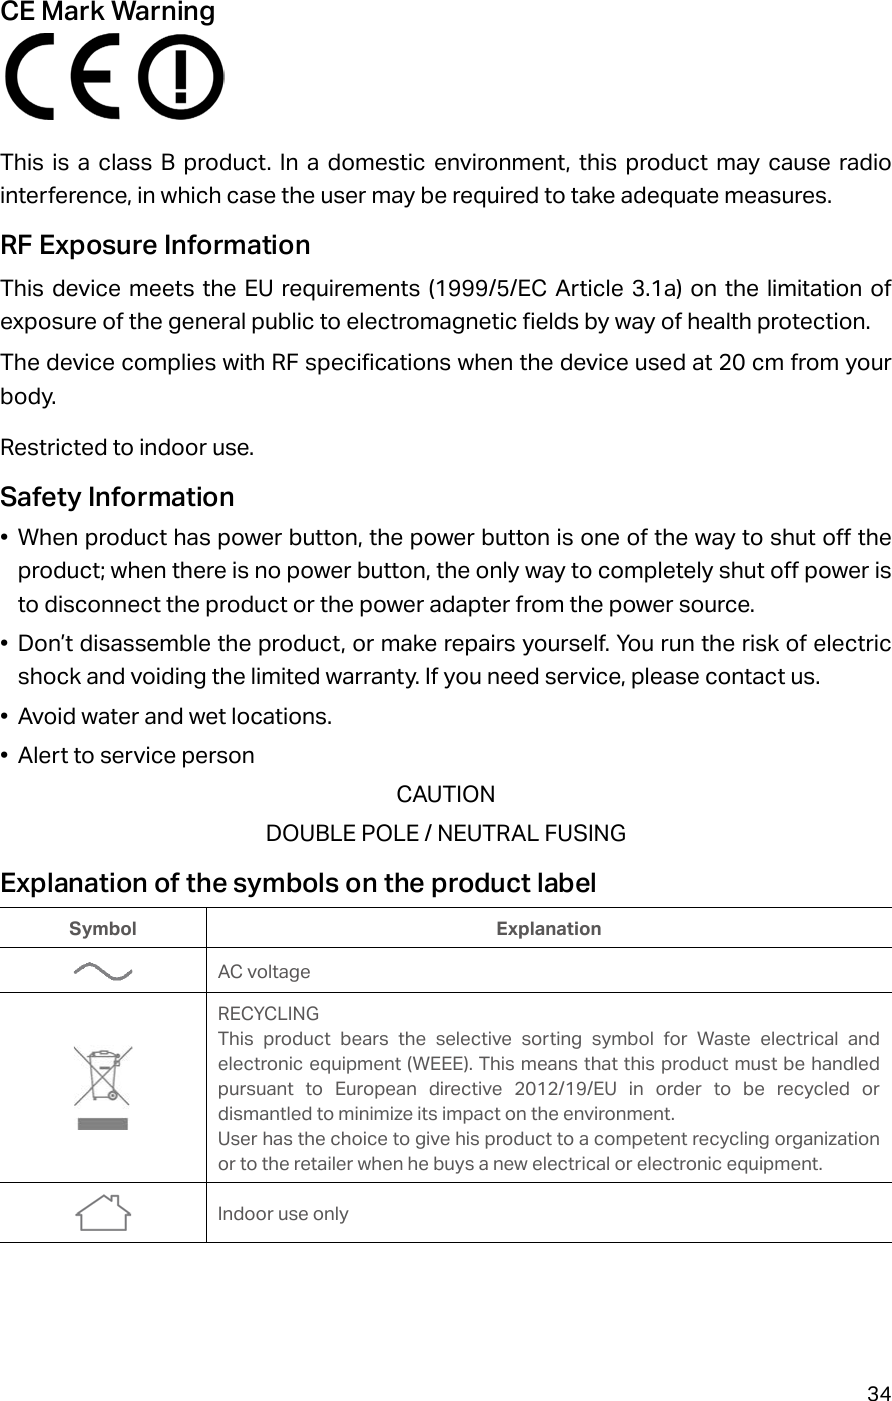 34CE Mark Warning  This is a class B product. In a domestic environment, this product may cause radio interference, in which case the user may be required to take adequate measures.RF Exposure InformationThis device meets the EU requirements (1999/5/EC Article 3.1a) on the limitation of exposure of the general public to electromagnetic fields by way of health protection.The device complies with RF specifications when the device used at 20 cm from your body.Restricted to indoor use.Safety Information•  When product has power button, the power button is one of the way to shut off the product; when there is no power button, the only way to completely shut off power is to disconnect the product or the power adapter from the power source.•  Don’t disassemble the product, or make repairs yourself. You run the risk of electric shock and voiding the limited warranty. If you need service, please contact us.•  Avoid water and wet locations.•  Alert to service personCAUTIONDOUBLE POLE / NEUTRAL FUSINGExplanation of the symbols on the product labelSymbol ExplanationAC voltageRECYCLINGThis product bears the selective sorting symbol for Waste electrical and electronic equipment (WEEE). This means that this product must be handled pursuant to European directive 2012/19/EU in order to be recycled or dismantled to minimize its impact on the environment.User has the choice to give his product to a competent recycling organization or to the retailer when he buys a new electrical or electronic equipment.Indoor use only